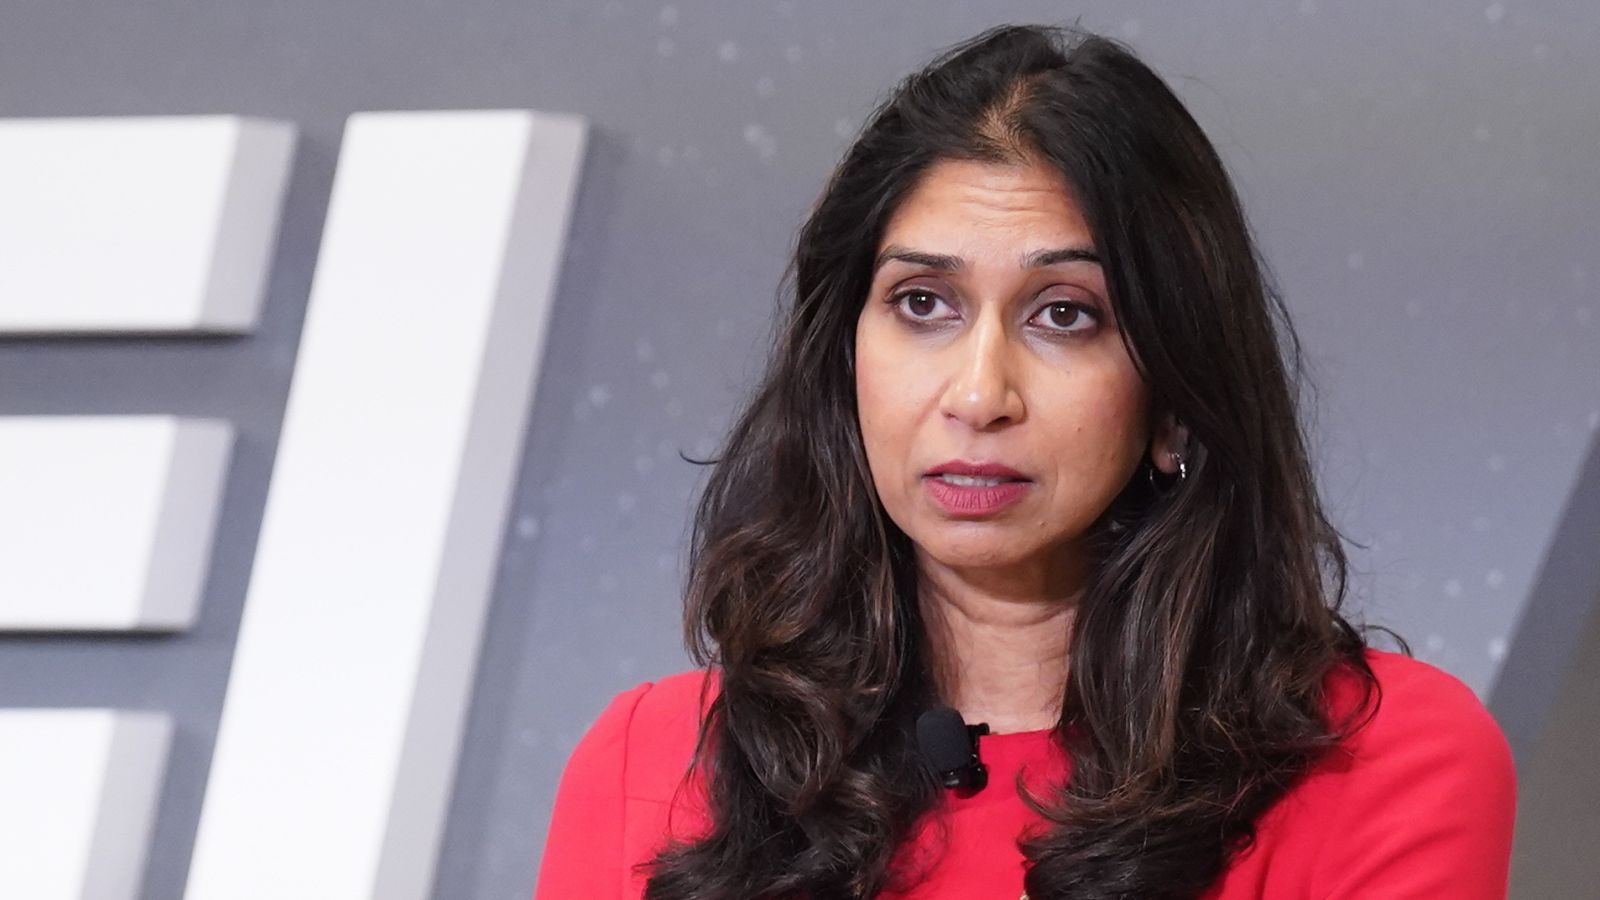 Home Secretary Suella Braverman claims illegal migration is 'existential challenge' and hits out at 'dogma of multiculturalism'